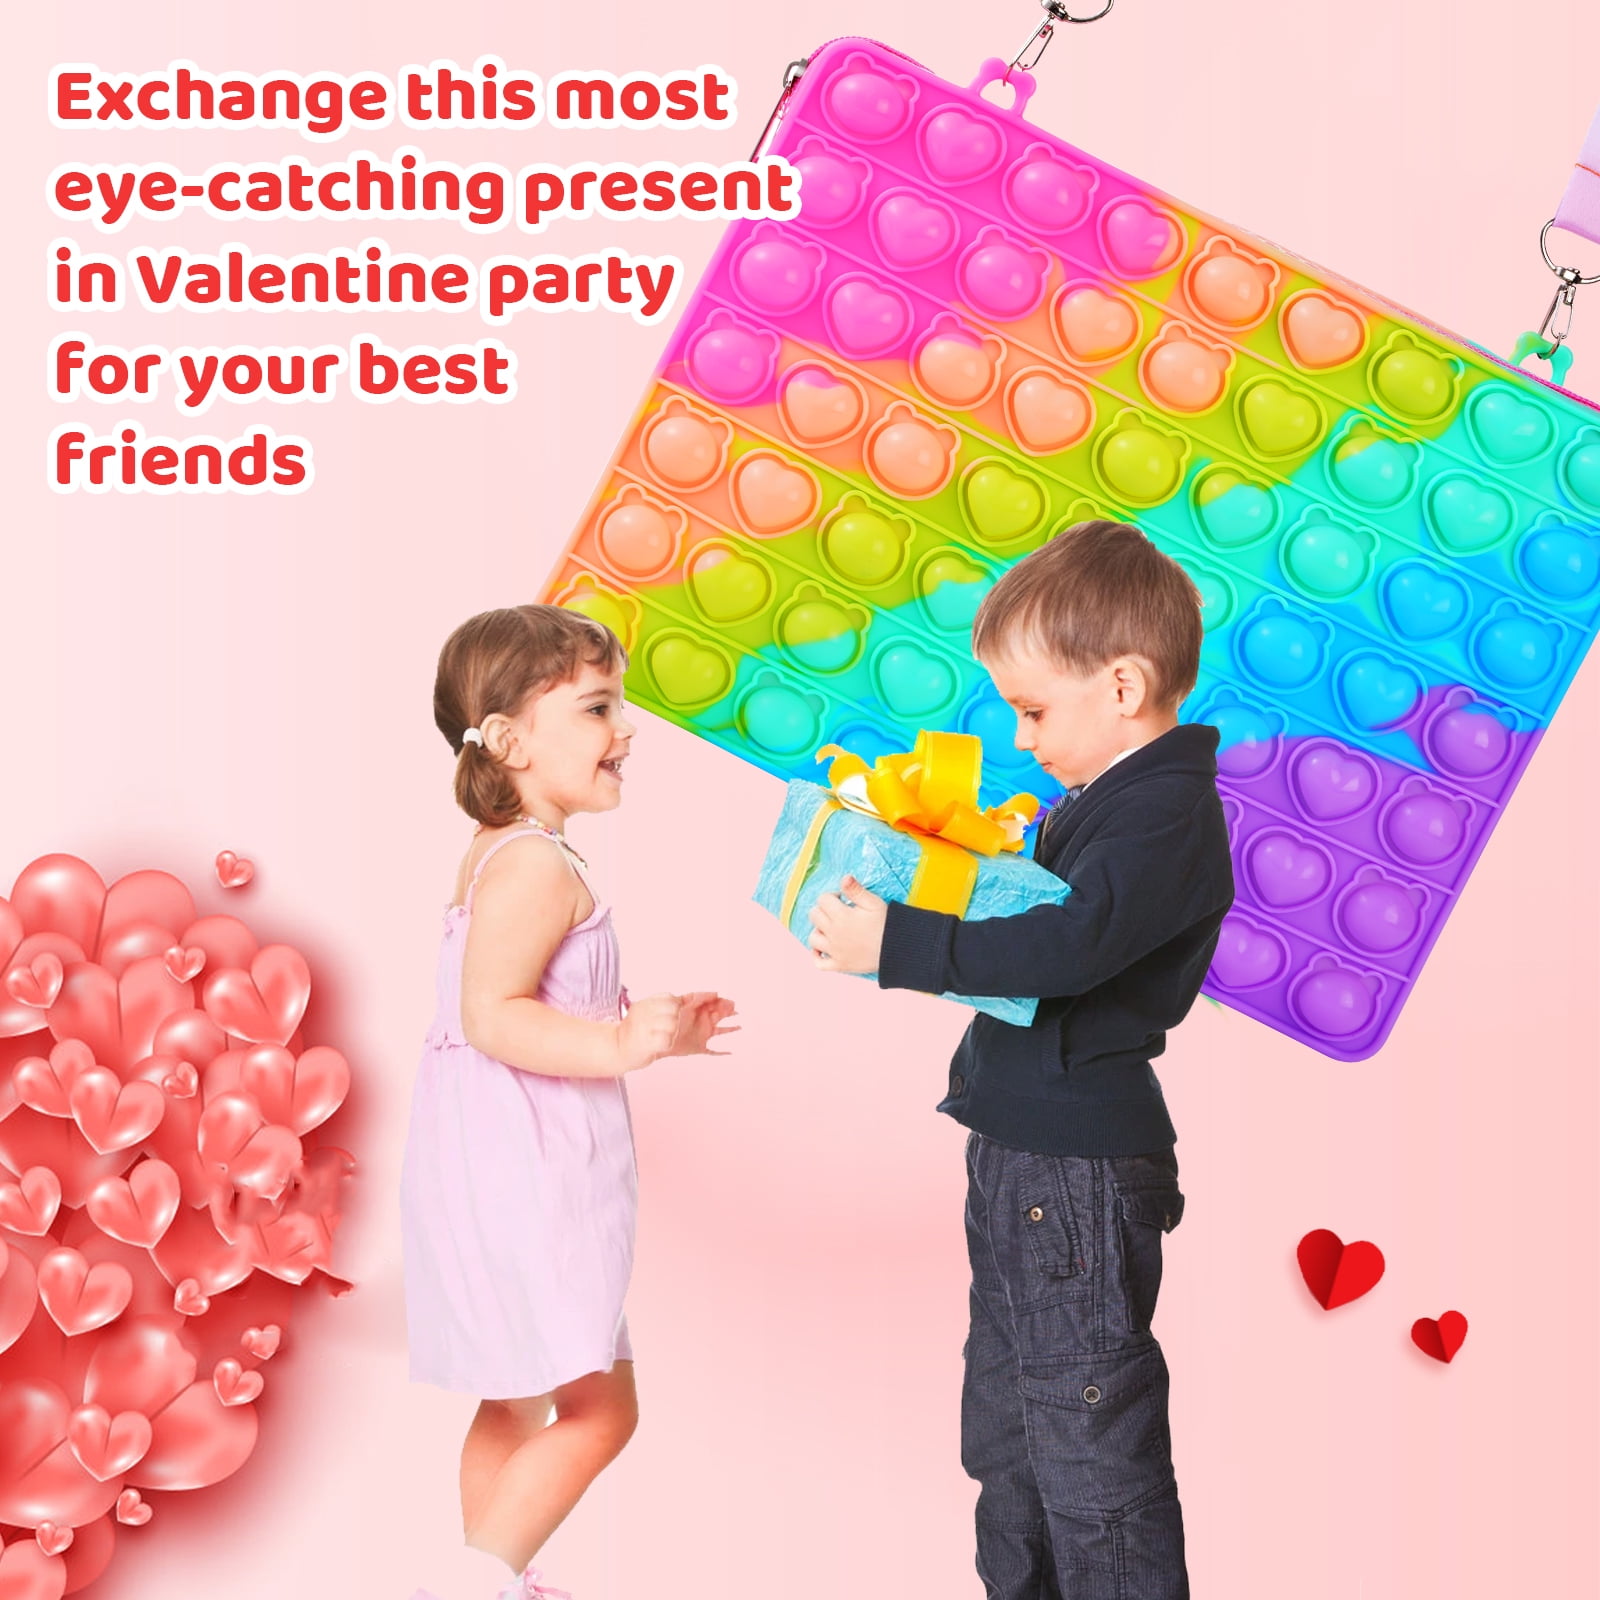  75 PCS Valentines Day Gifts for Kids,Valentines Mini Pop  Keychain with Valentines Day Cards,Valentine Exchange Gifts for Boys Girls  Valentines School Classroom Gifts,Valentines Party Favors : Toys & Games